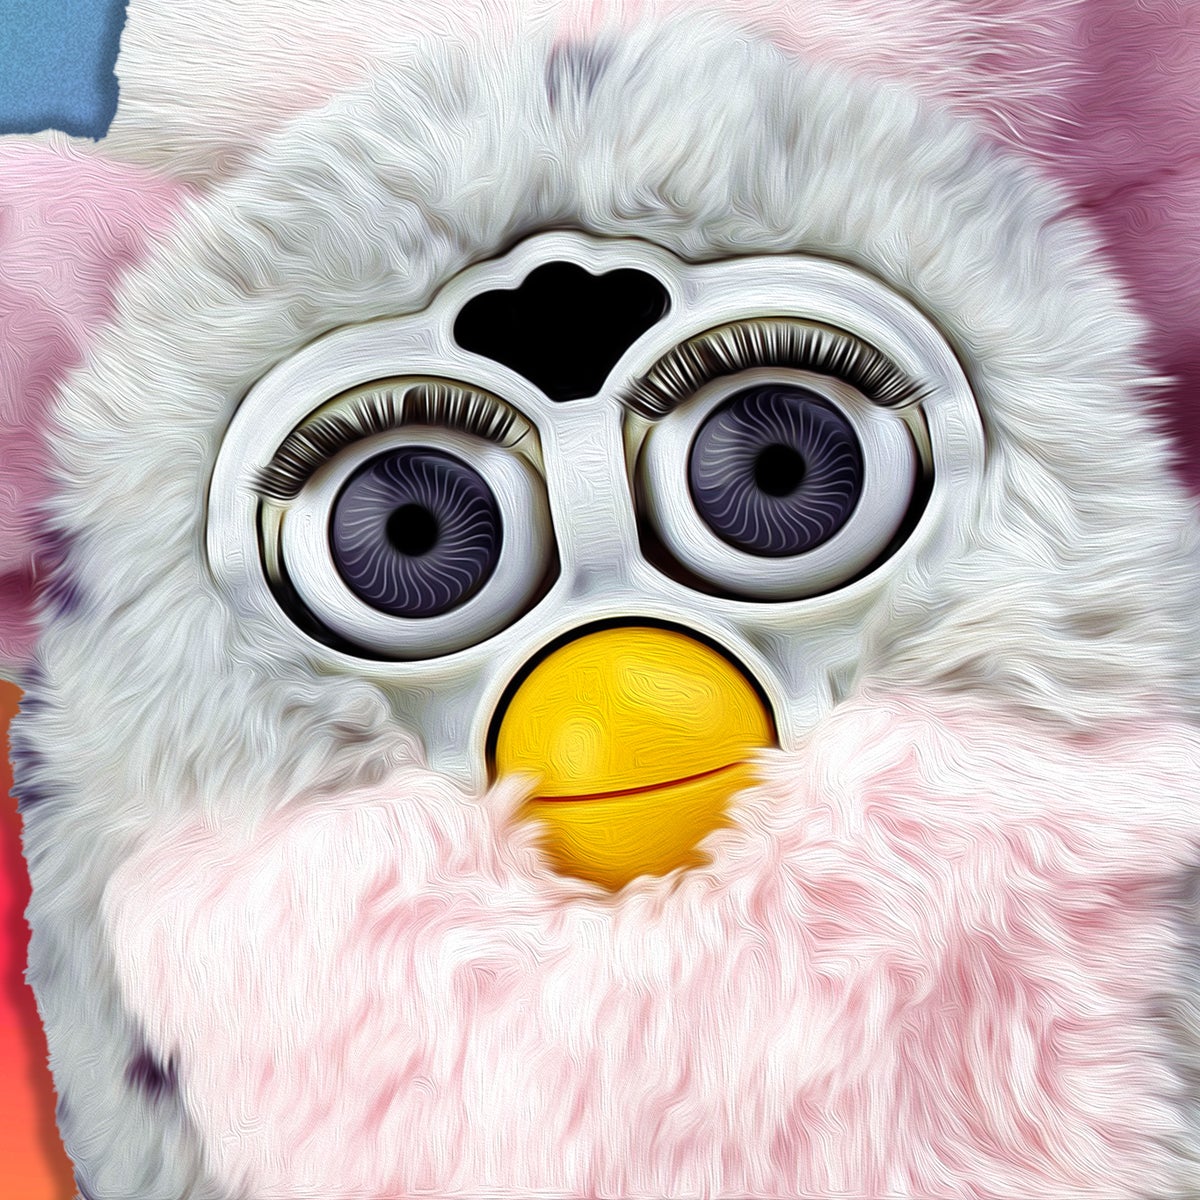 How the Furby took over the world